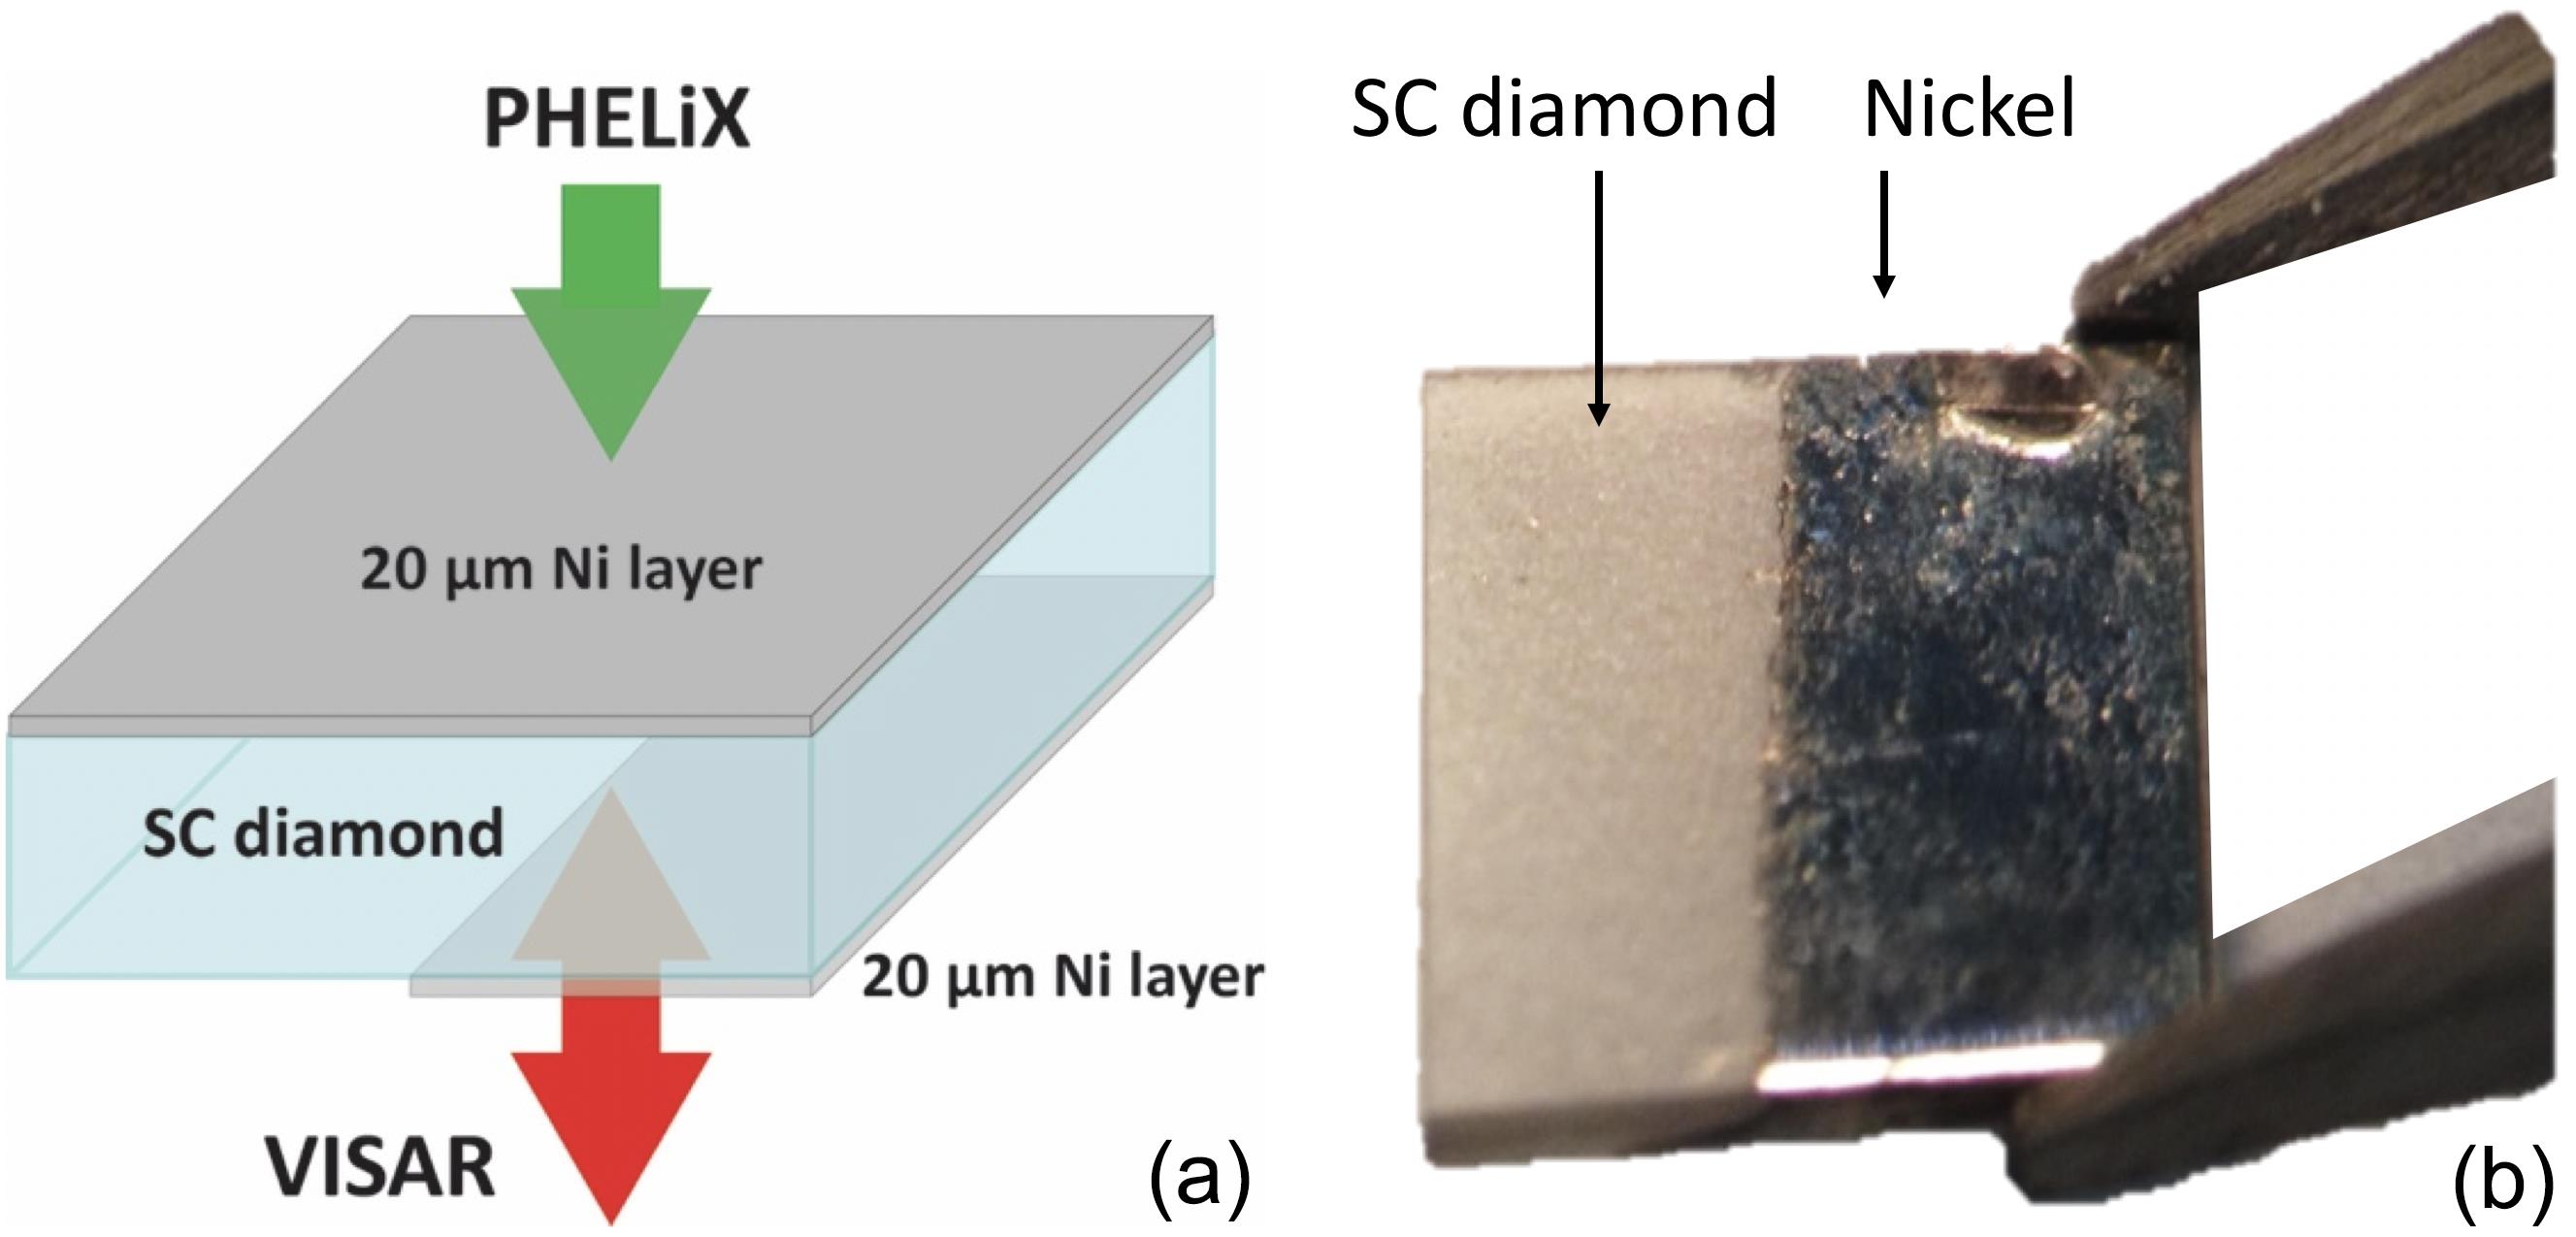 (a) Scheme of the target used in the experiment and (b) image of Ni layer deposited on target rear side (taken before deposition of the Ni layer on the target front side).